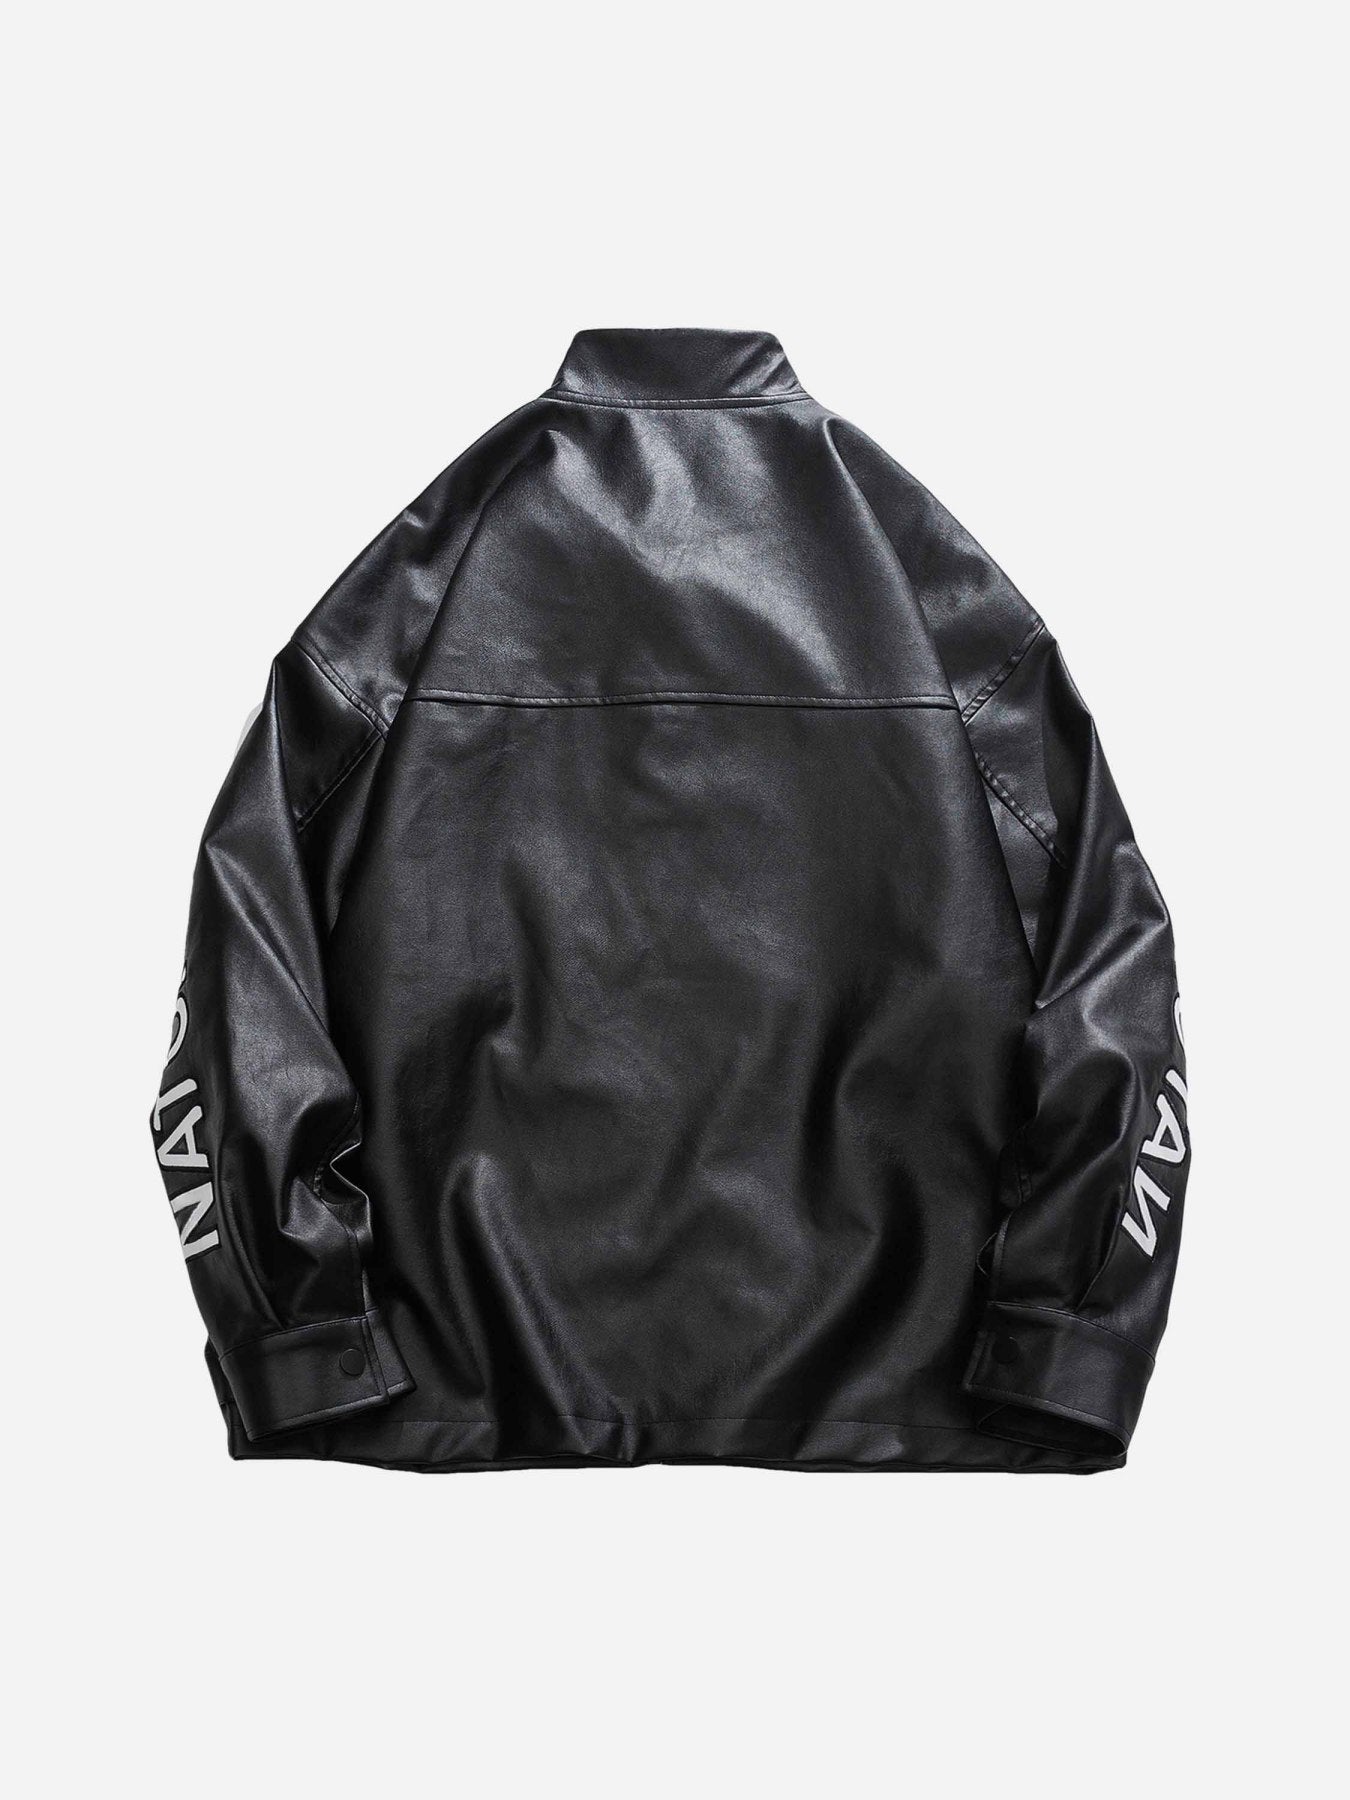 The Supermade American Hiphop Pilot Jacket